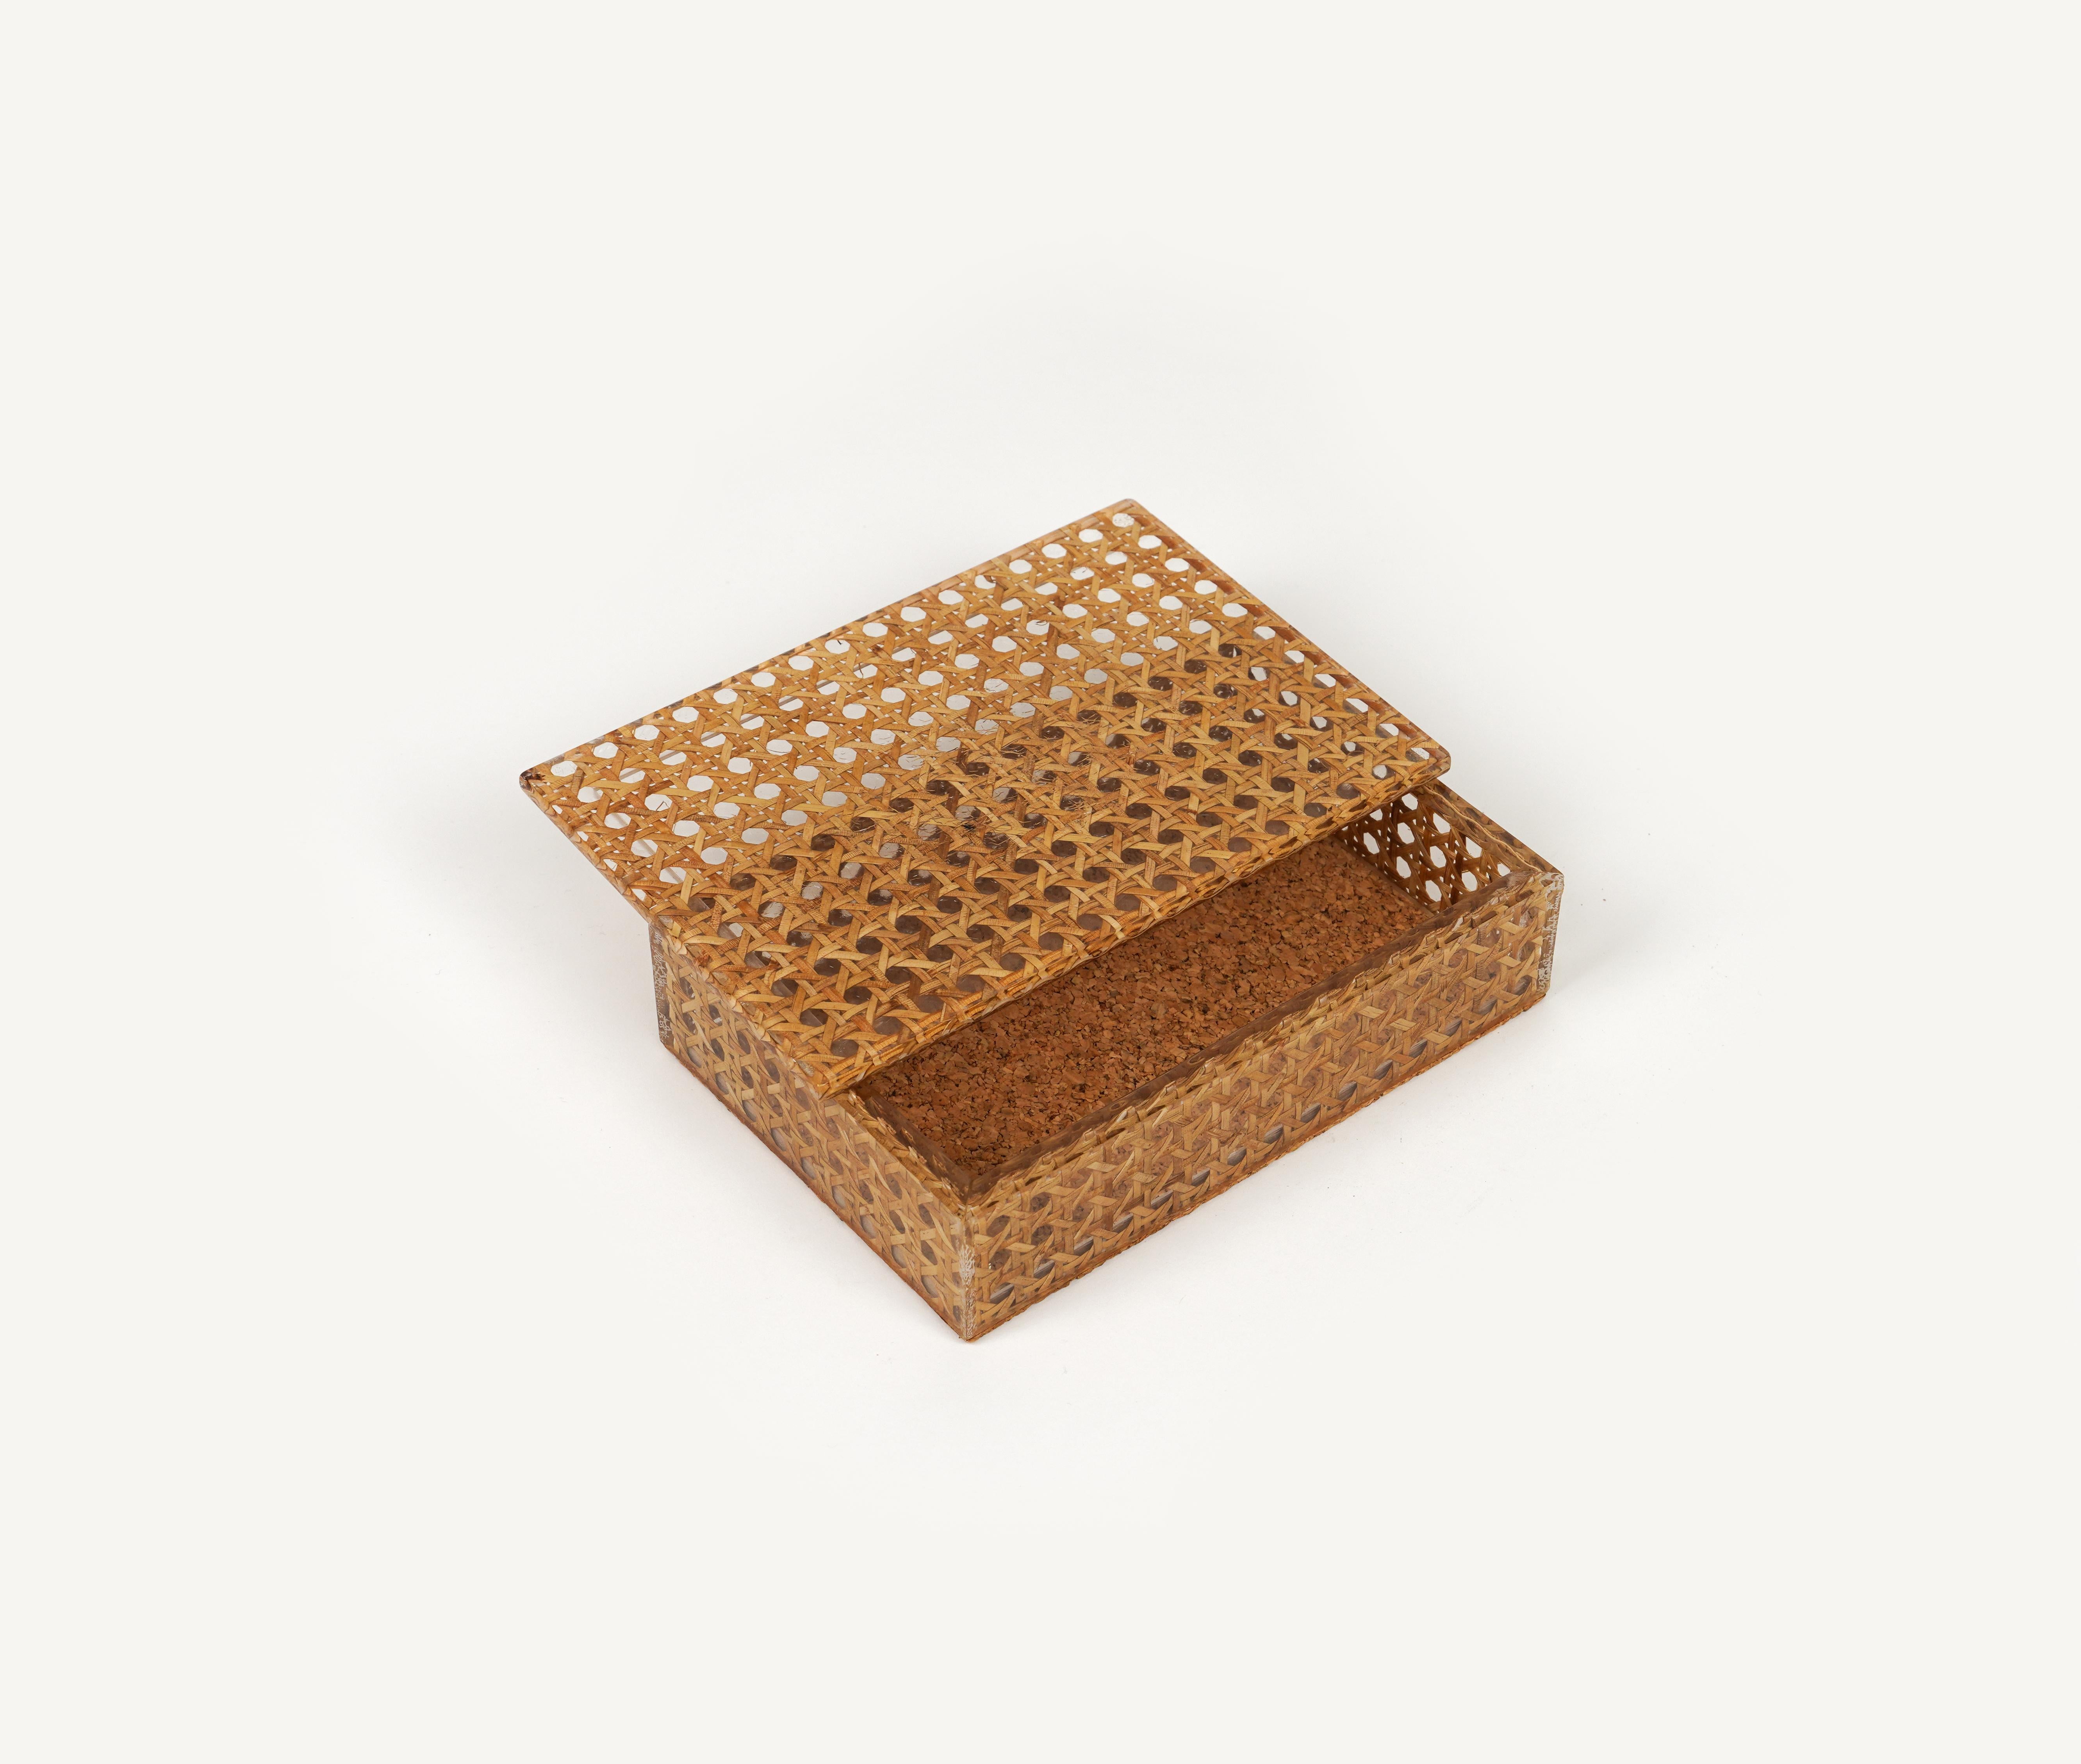 Midcentury Box in Rattan, Lucite and Cork Christian Dior Style, Italy 1970s For Sale 3